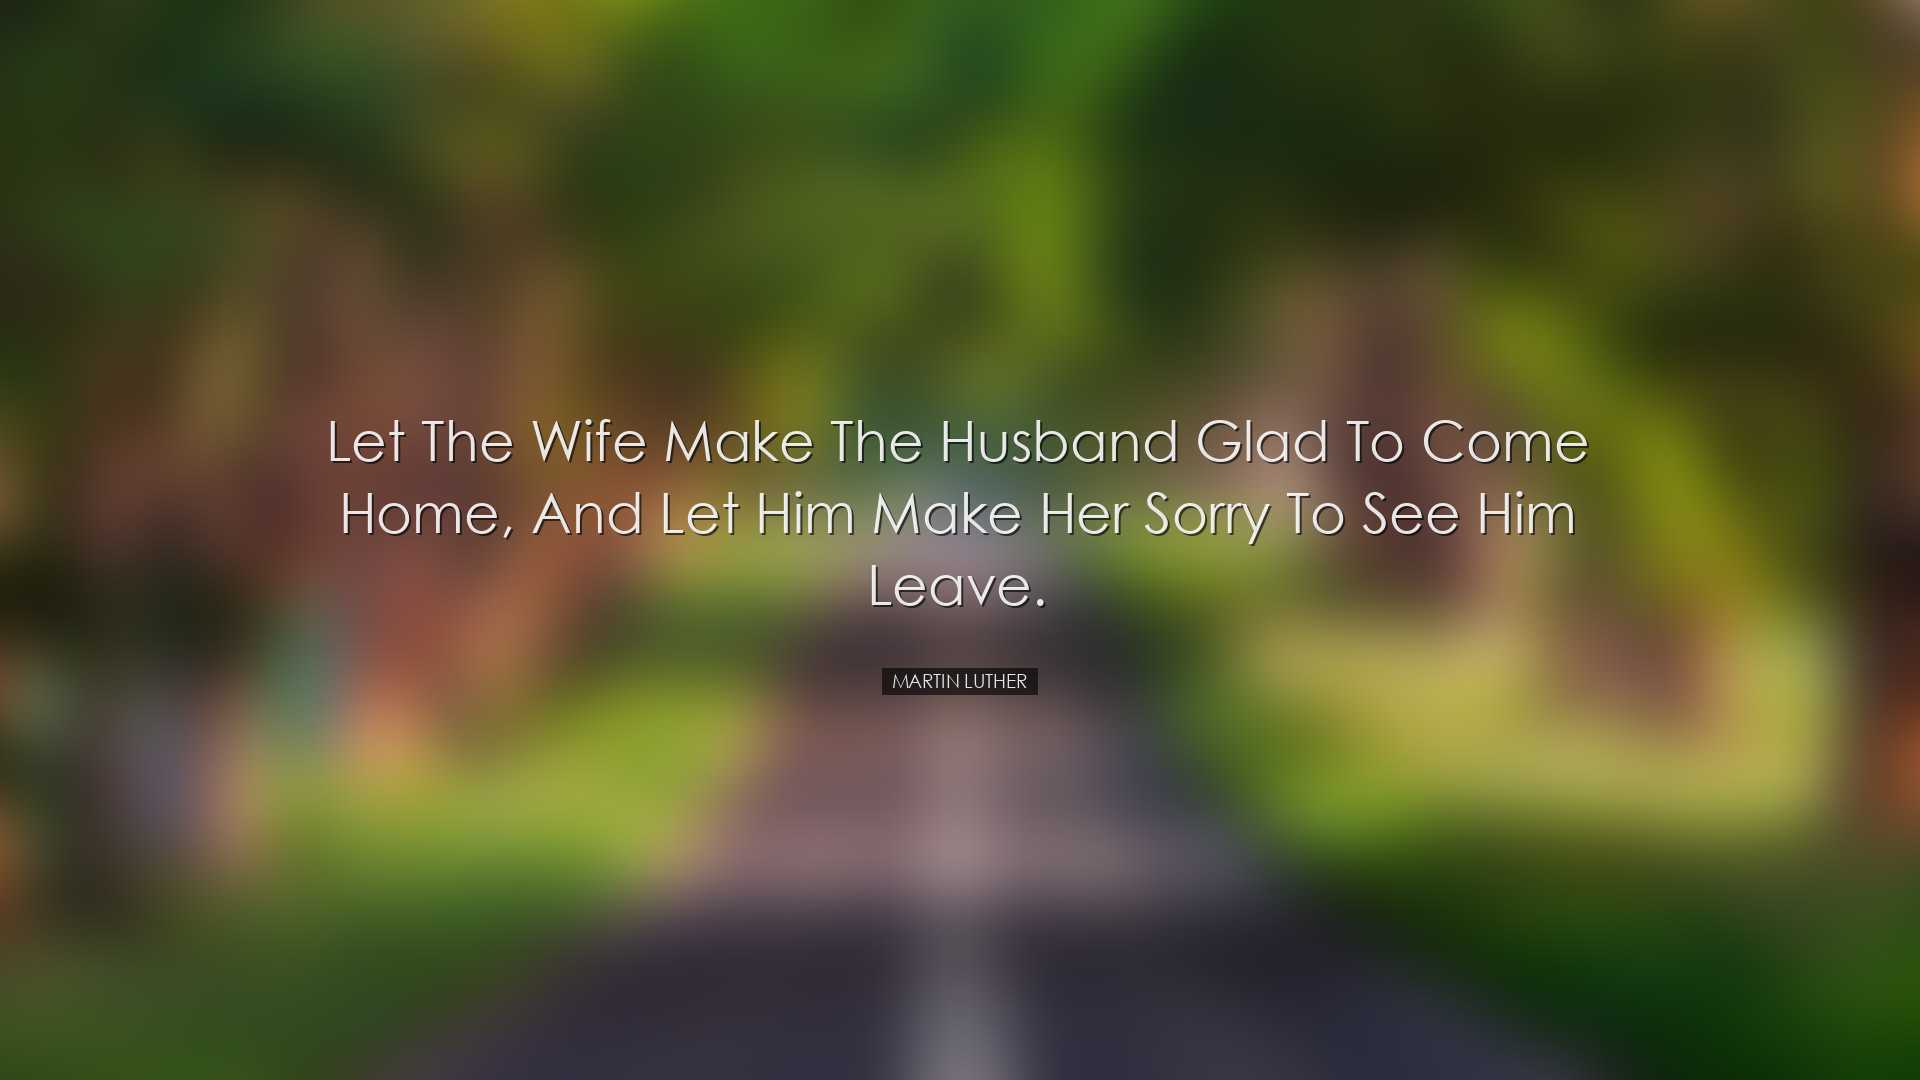 Let the wife make the husband glad to come home, and let him make